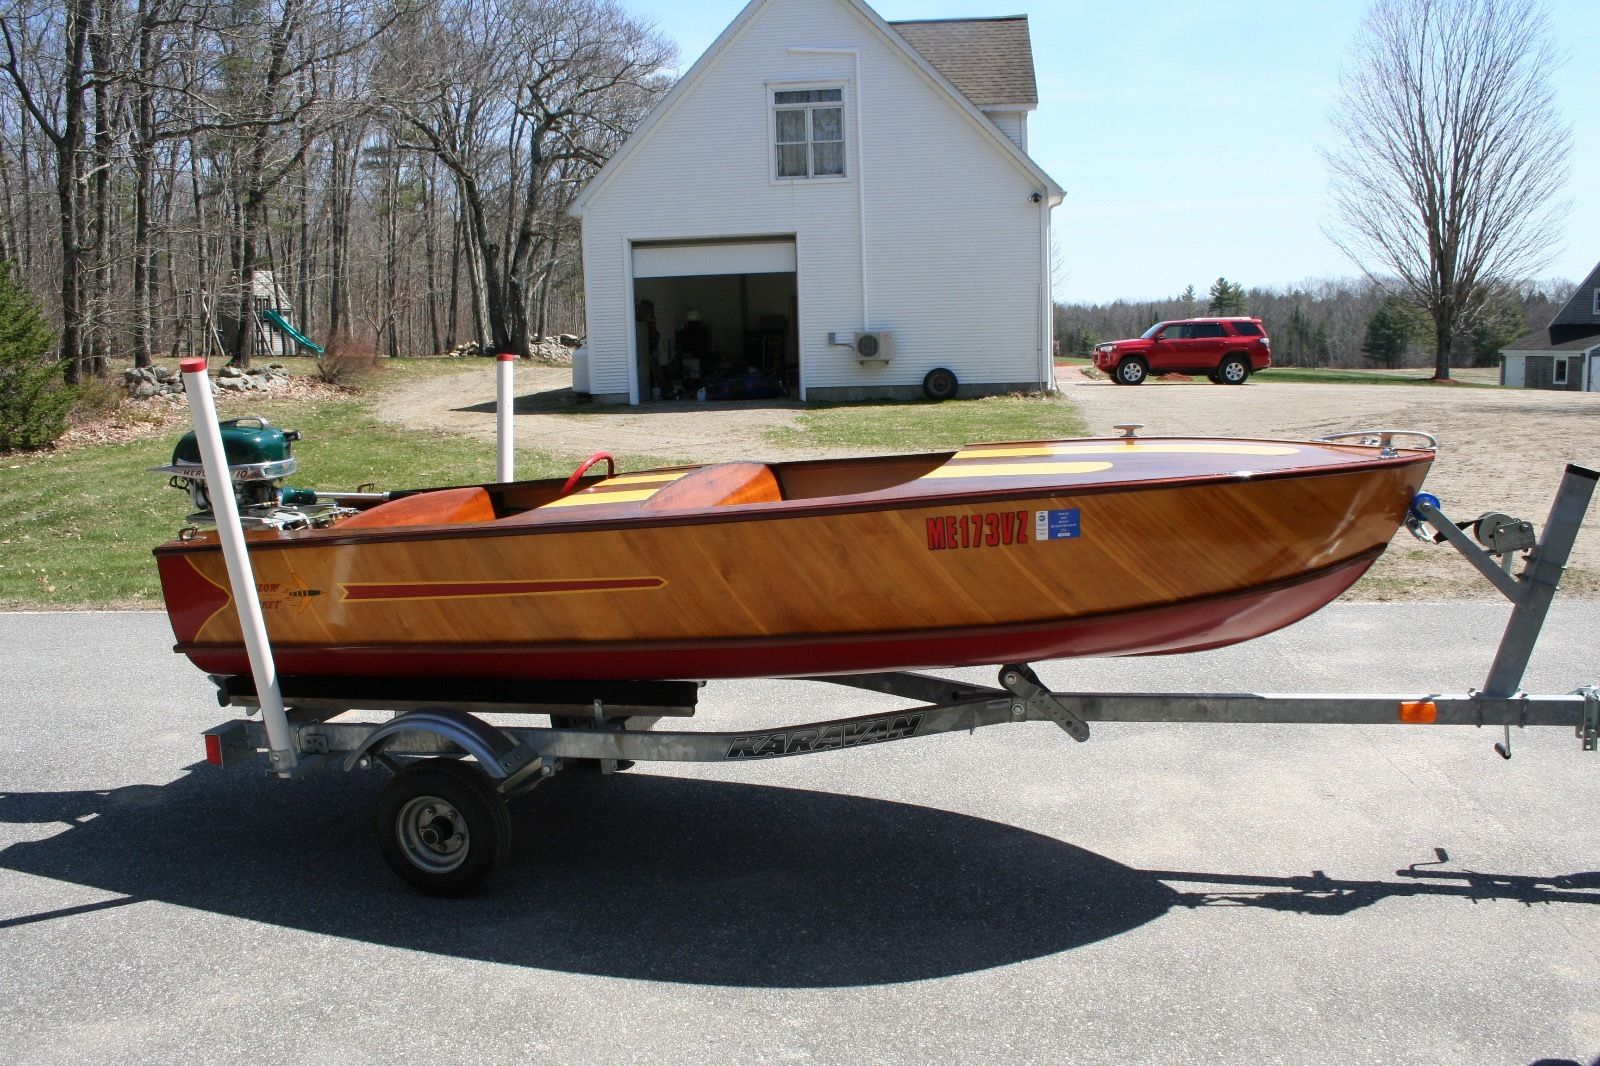 Yellow Jacket Runabout 1955 for sale for $5,000 - Boats-from-USA.com